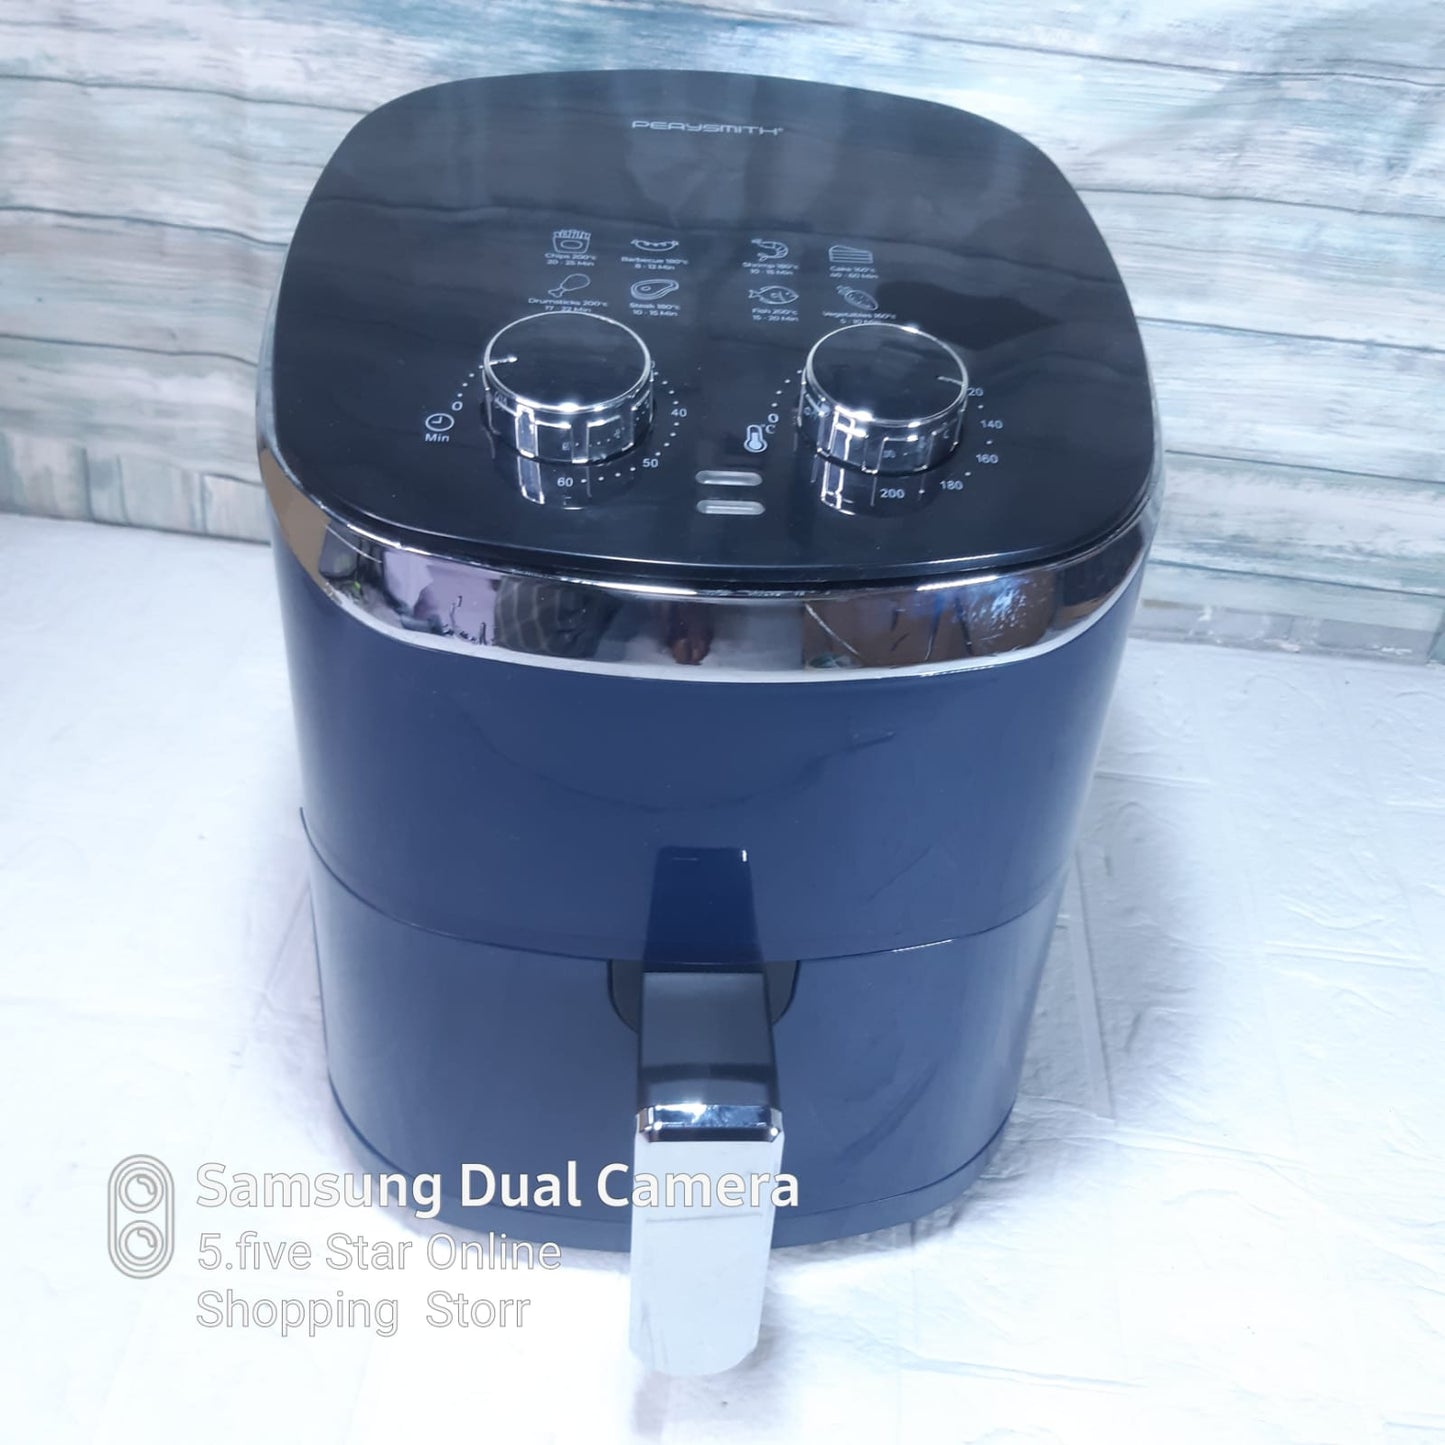 PerySmith Imported Air Fryer | 4.2 Litter Capacity